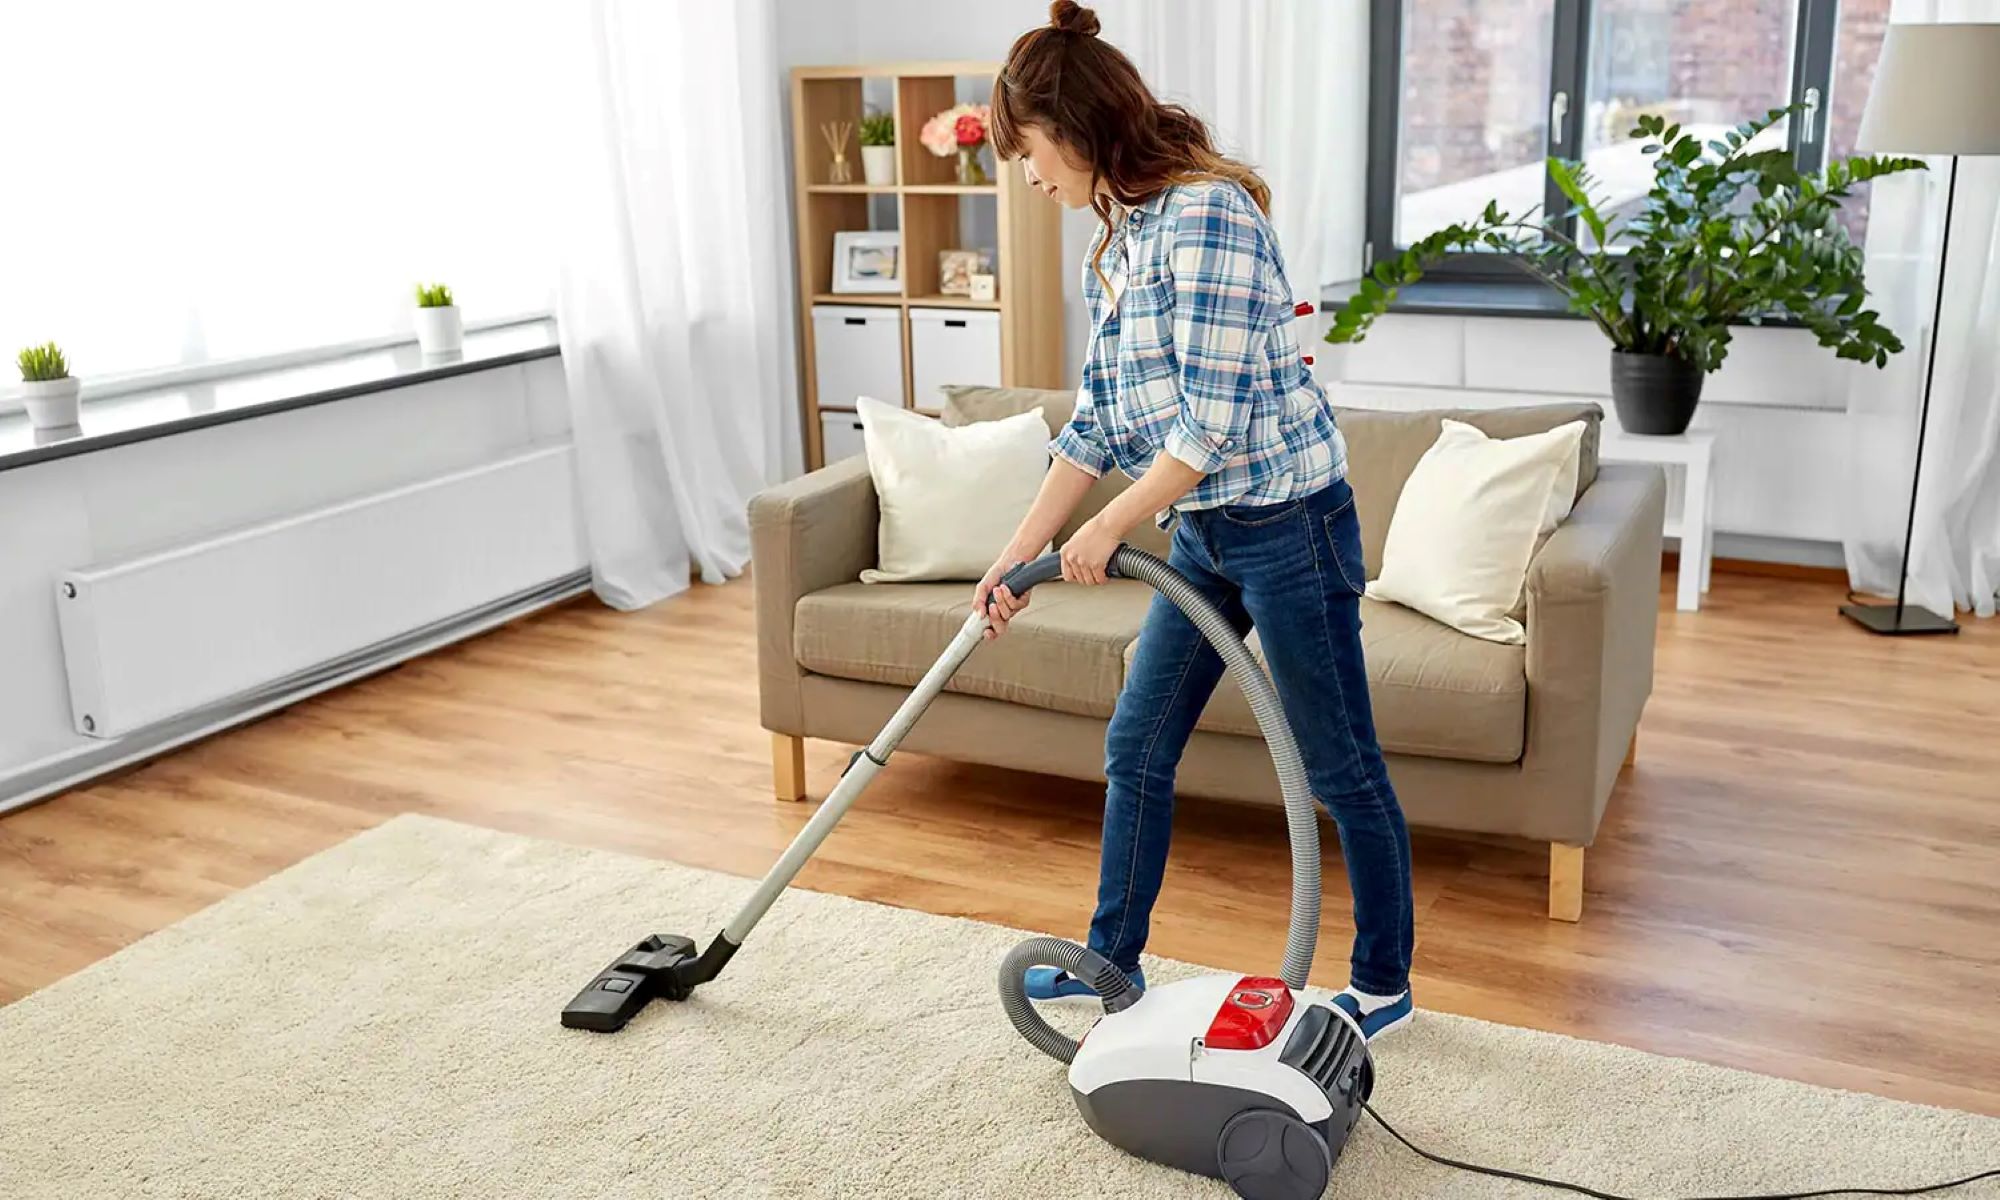 How Long To Leave Carpet Deodorizer On Before Vacuuming